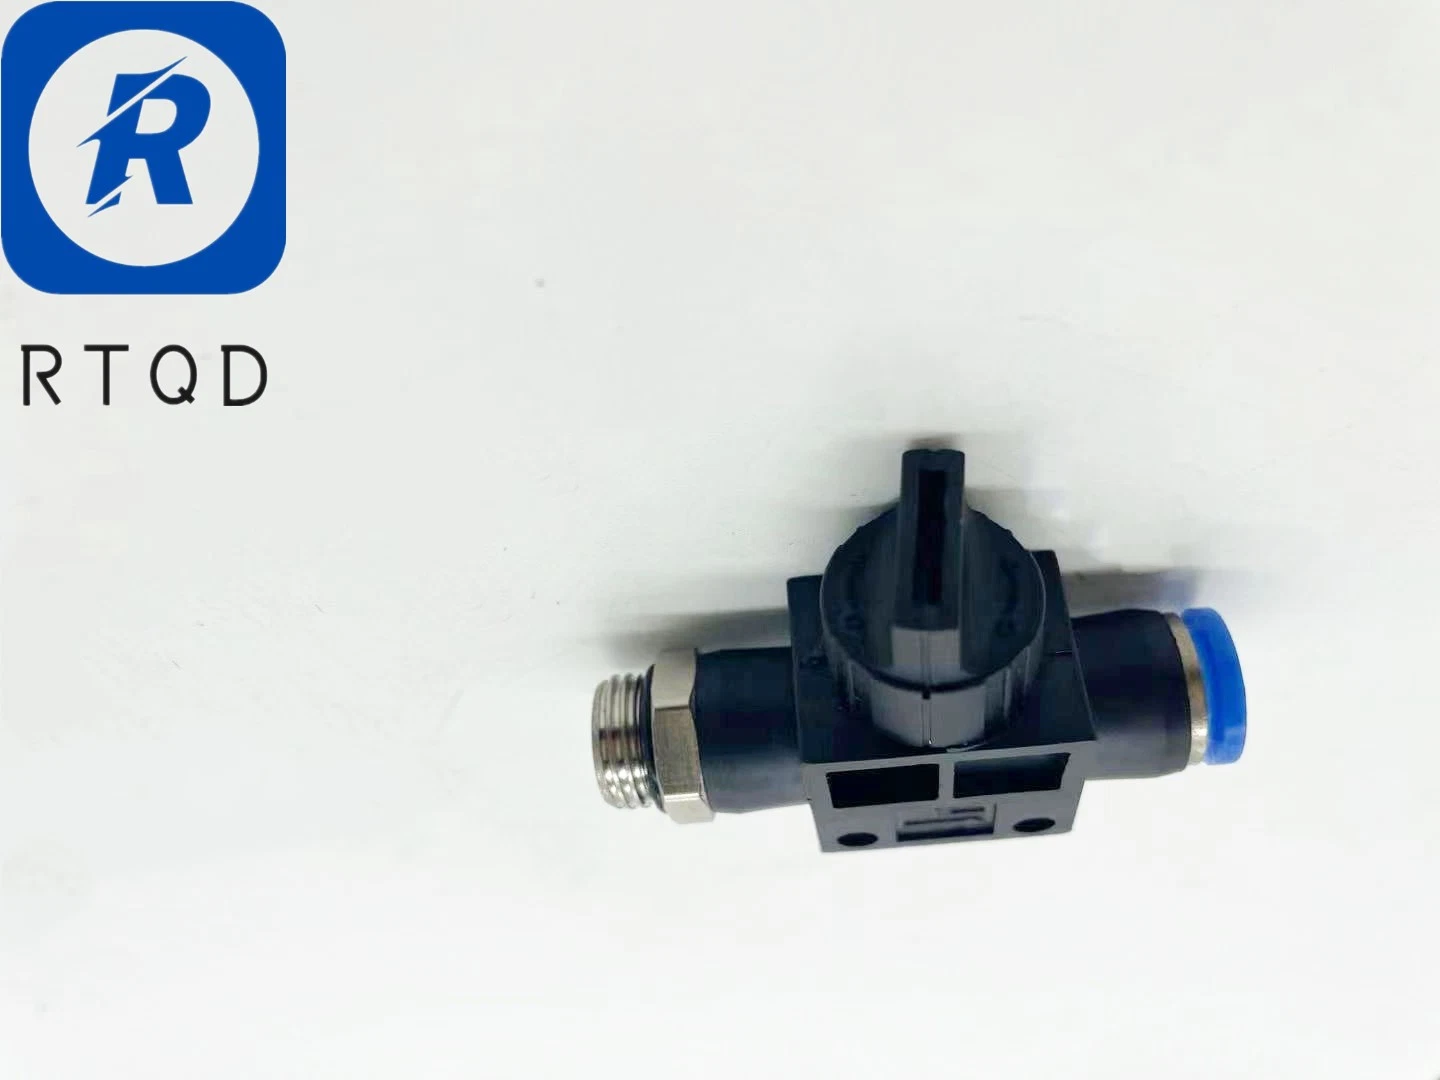 Pneumatic Component High Quality and Low Price Wholesale Push-in One Touch Fitting Air Control Pipe Fitting Hvsf02g-08 Customized Tube Connector